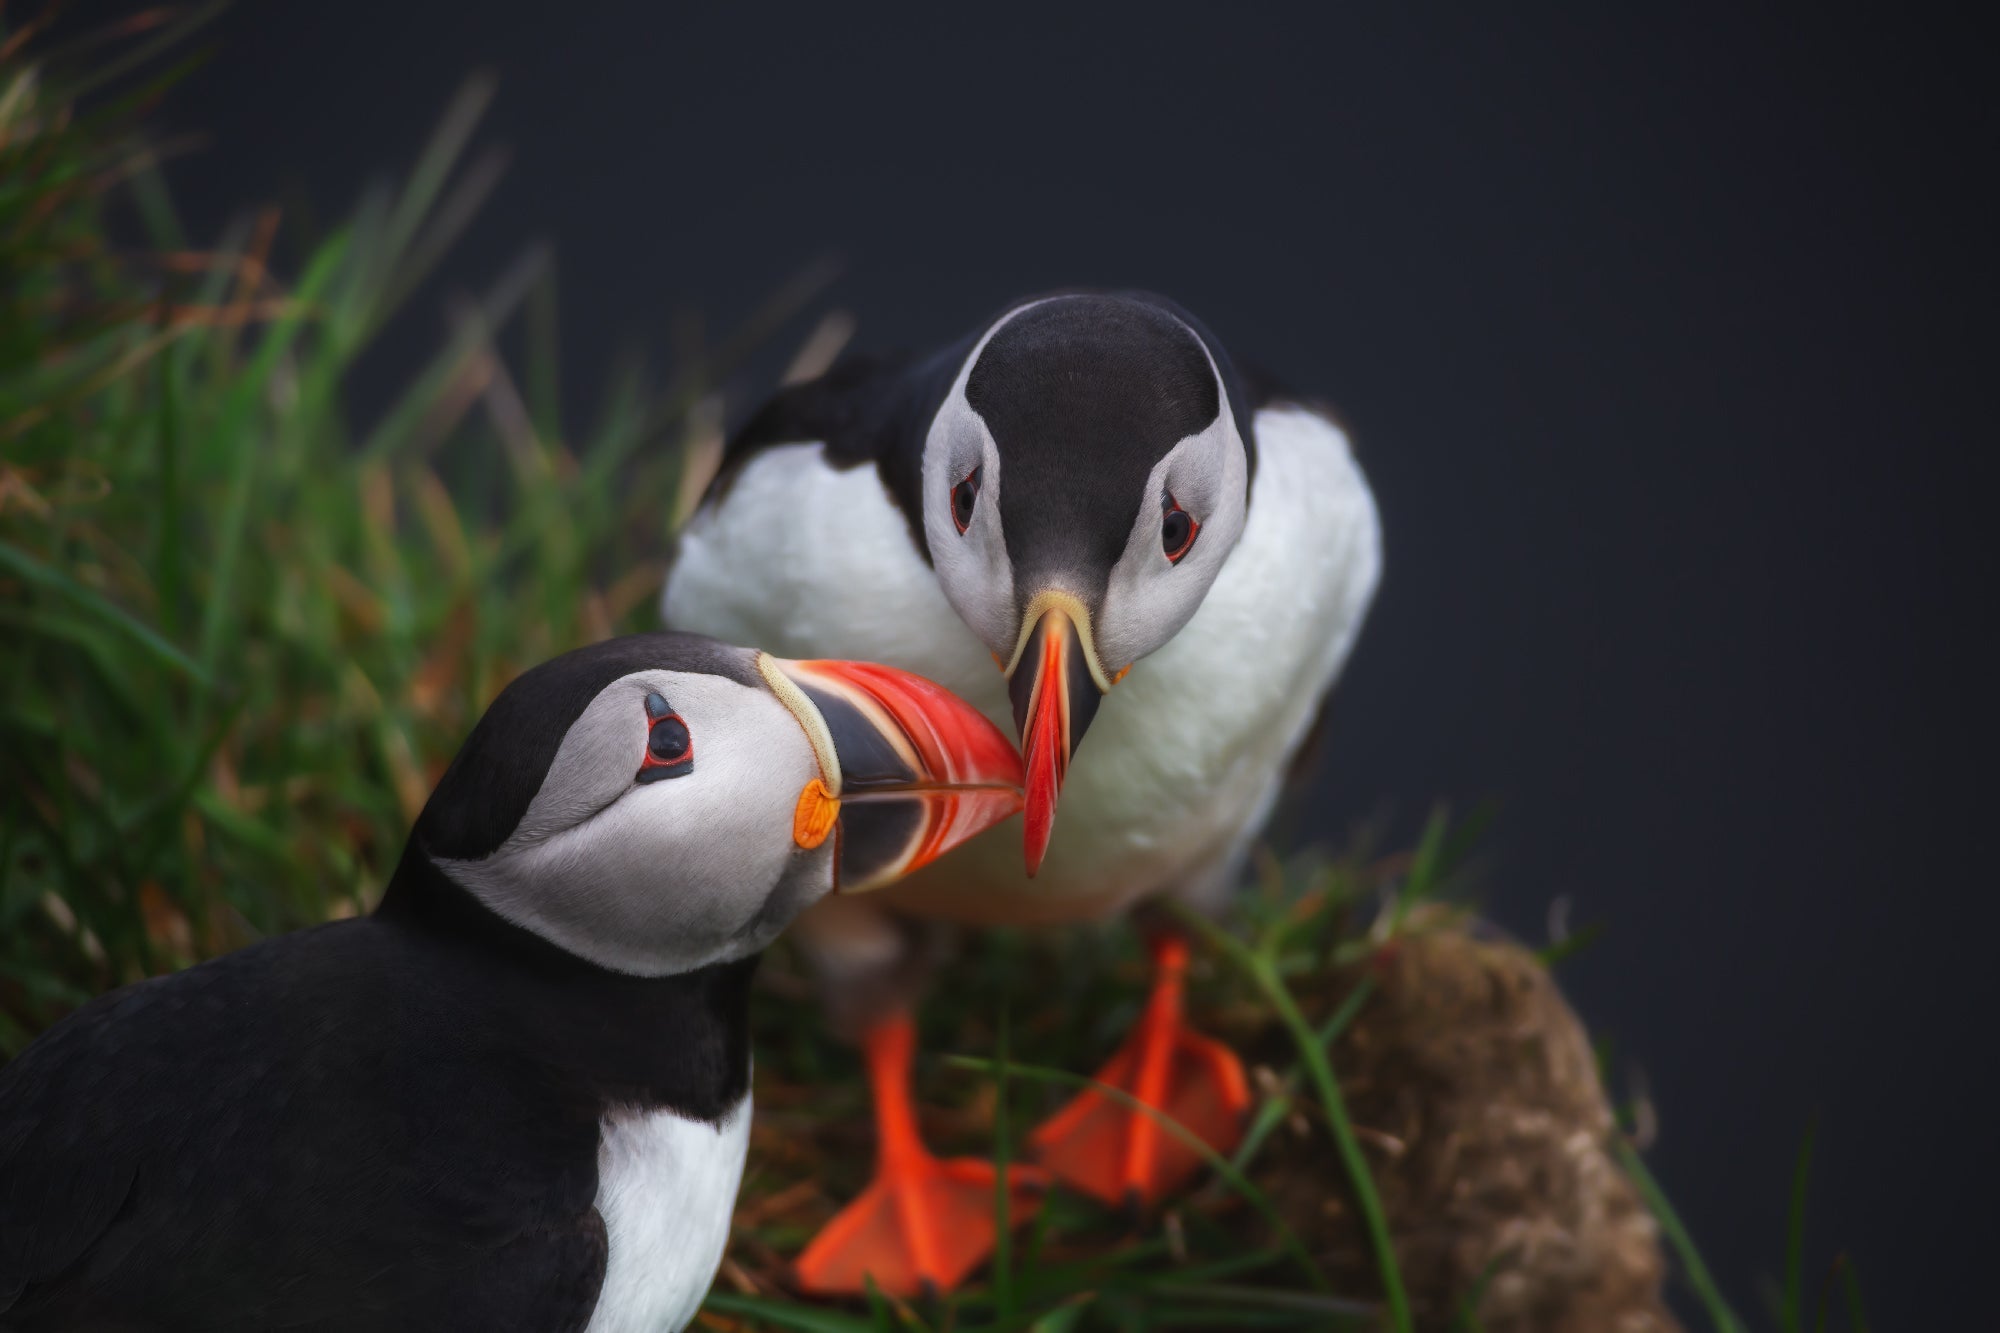 Puffin Love featured opacity image